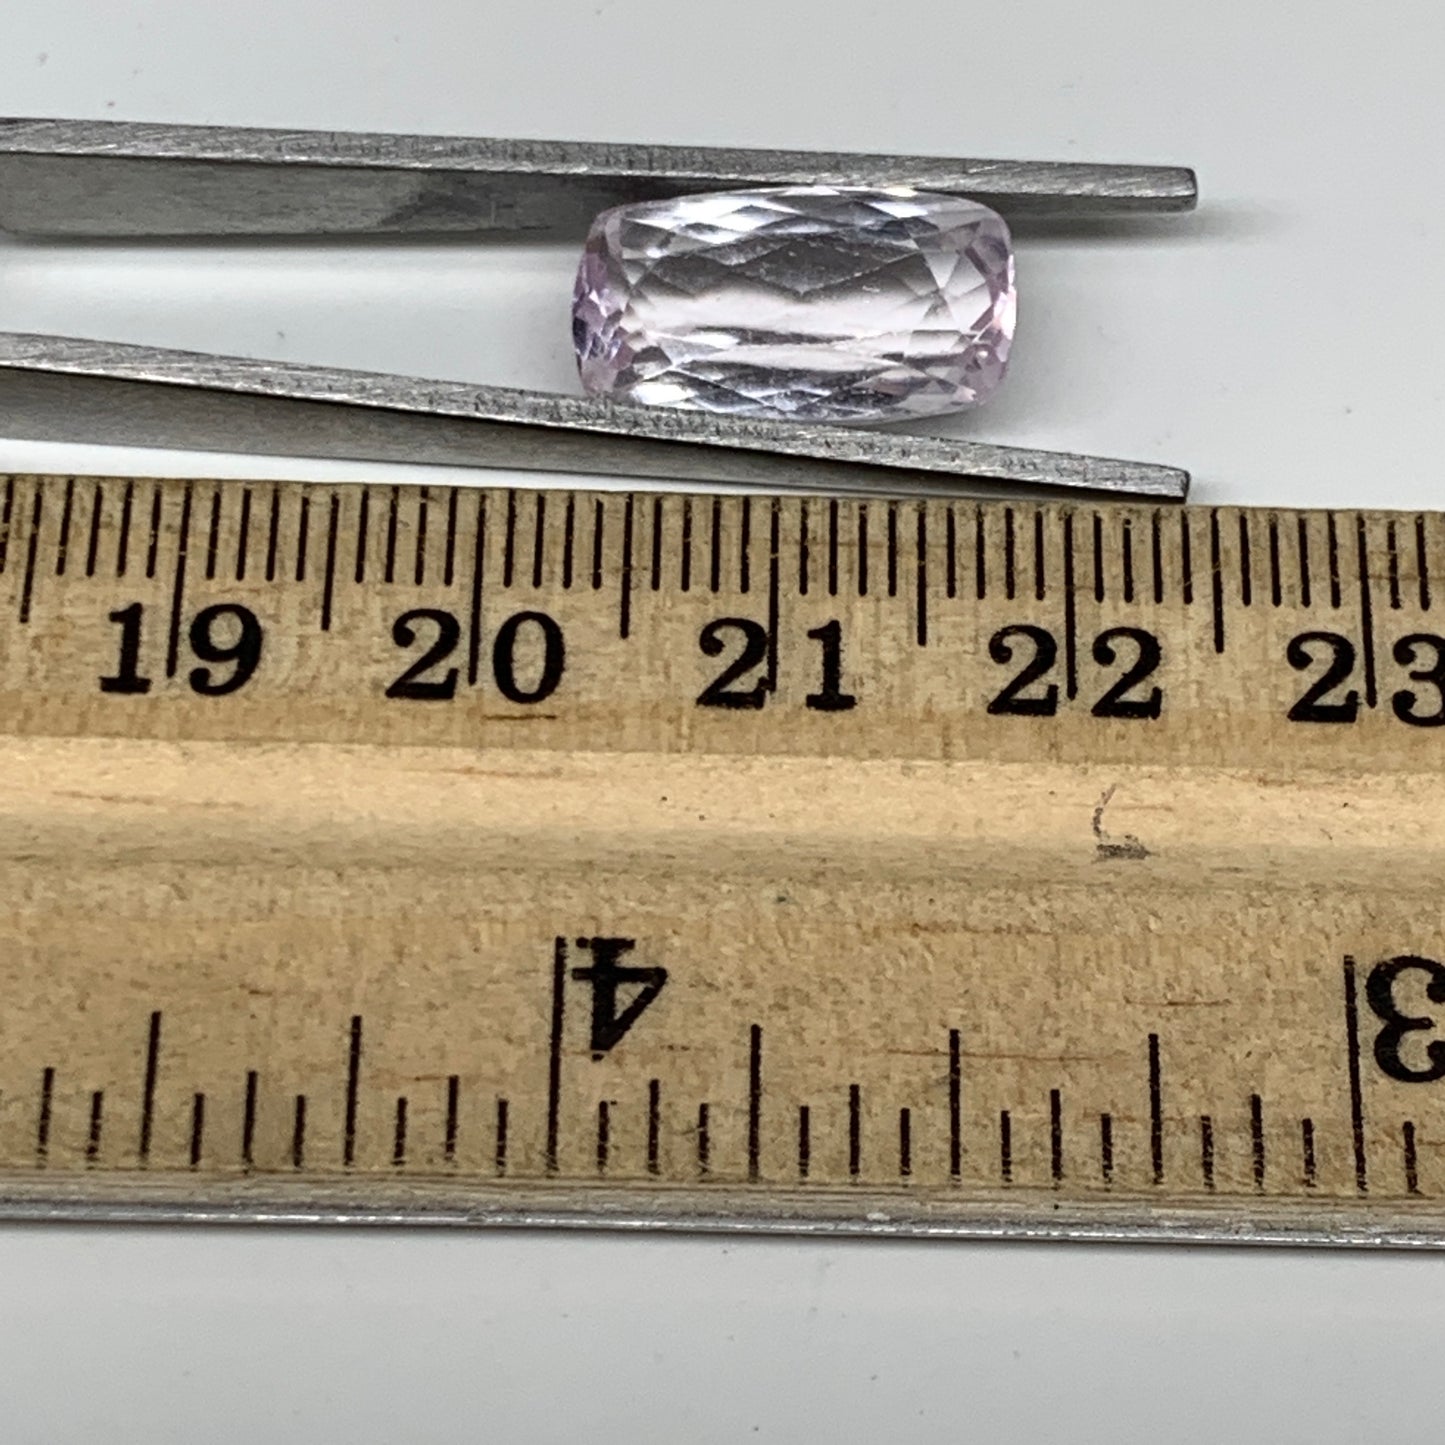 7.80cts, 15mmx8mmx6mm,Heated Kunzite Crystal Facetted Stone @Afghanistan,CTS231